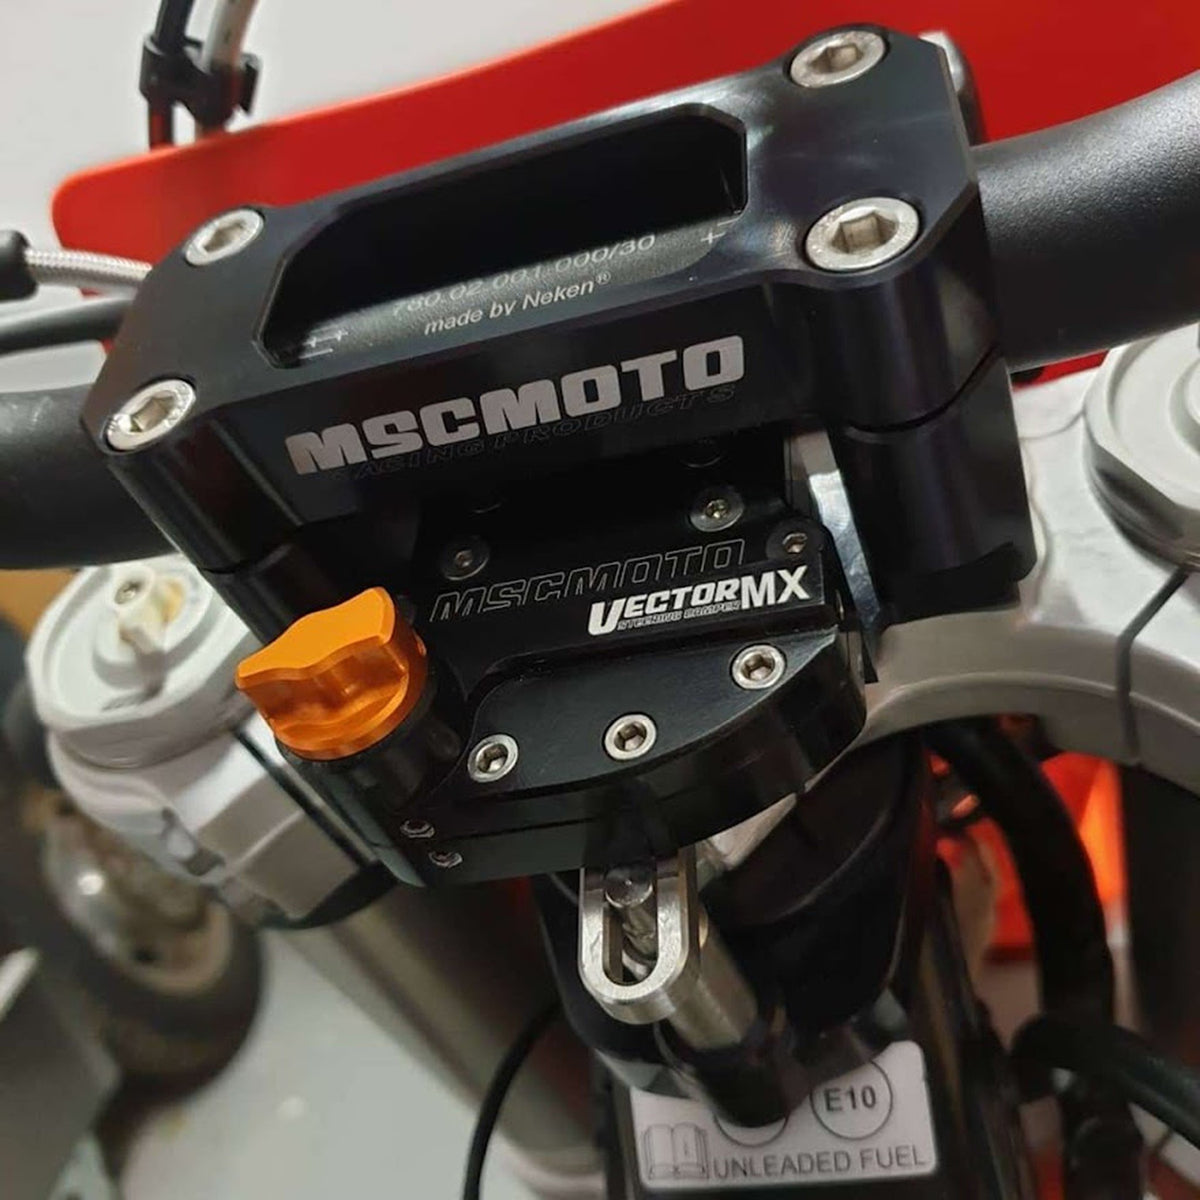 mscmotousa, VectorMX Steering Damper Kit &quot;Down Under&quot; Mount (VEC0001) - GAS GAS (EC, MC) KTM (EXC, SXF) HUSQVARNA (TC, TE, FC, FE) HUSABERG (FE, FX, TE), VEC0001, gas gas, gas-gas-2021-ec-250-esi5912814, husaberg, husaberg-2011-te-125-esi3907738, husqvarna, ktm, vectormx, , Imported and distributed in North &amp; South America by Lindeco Genuine Powersports.